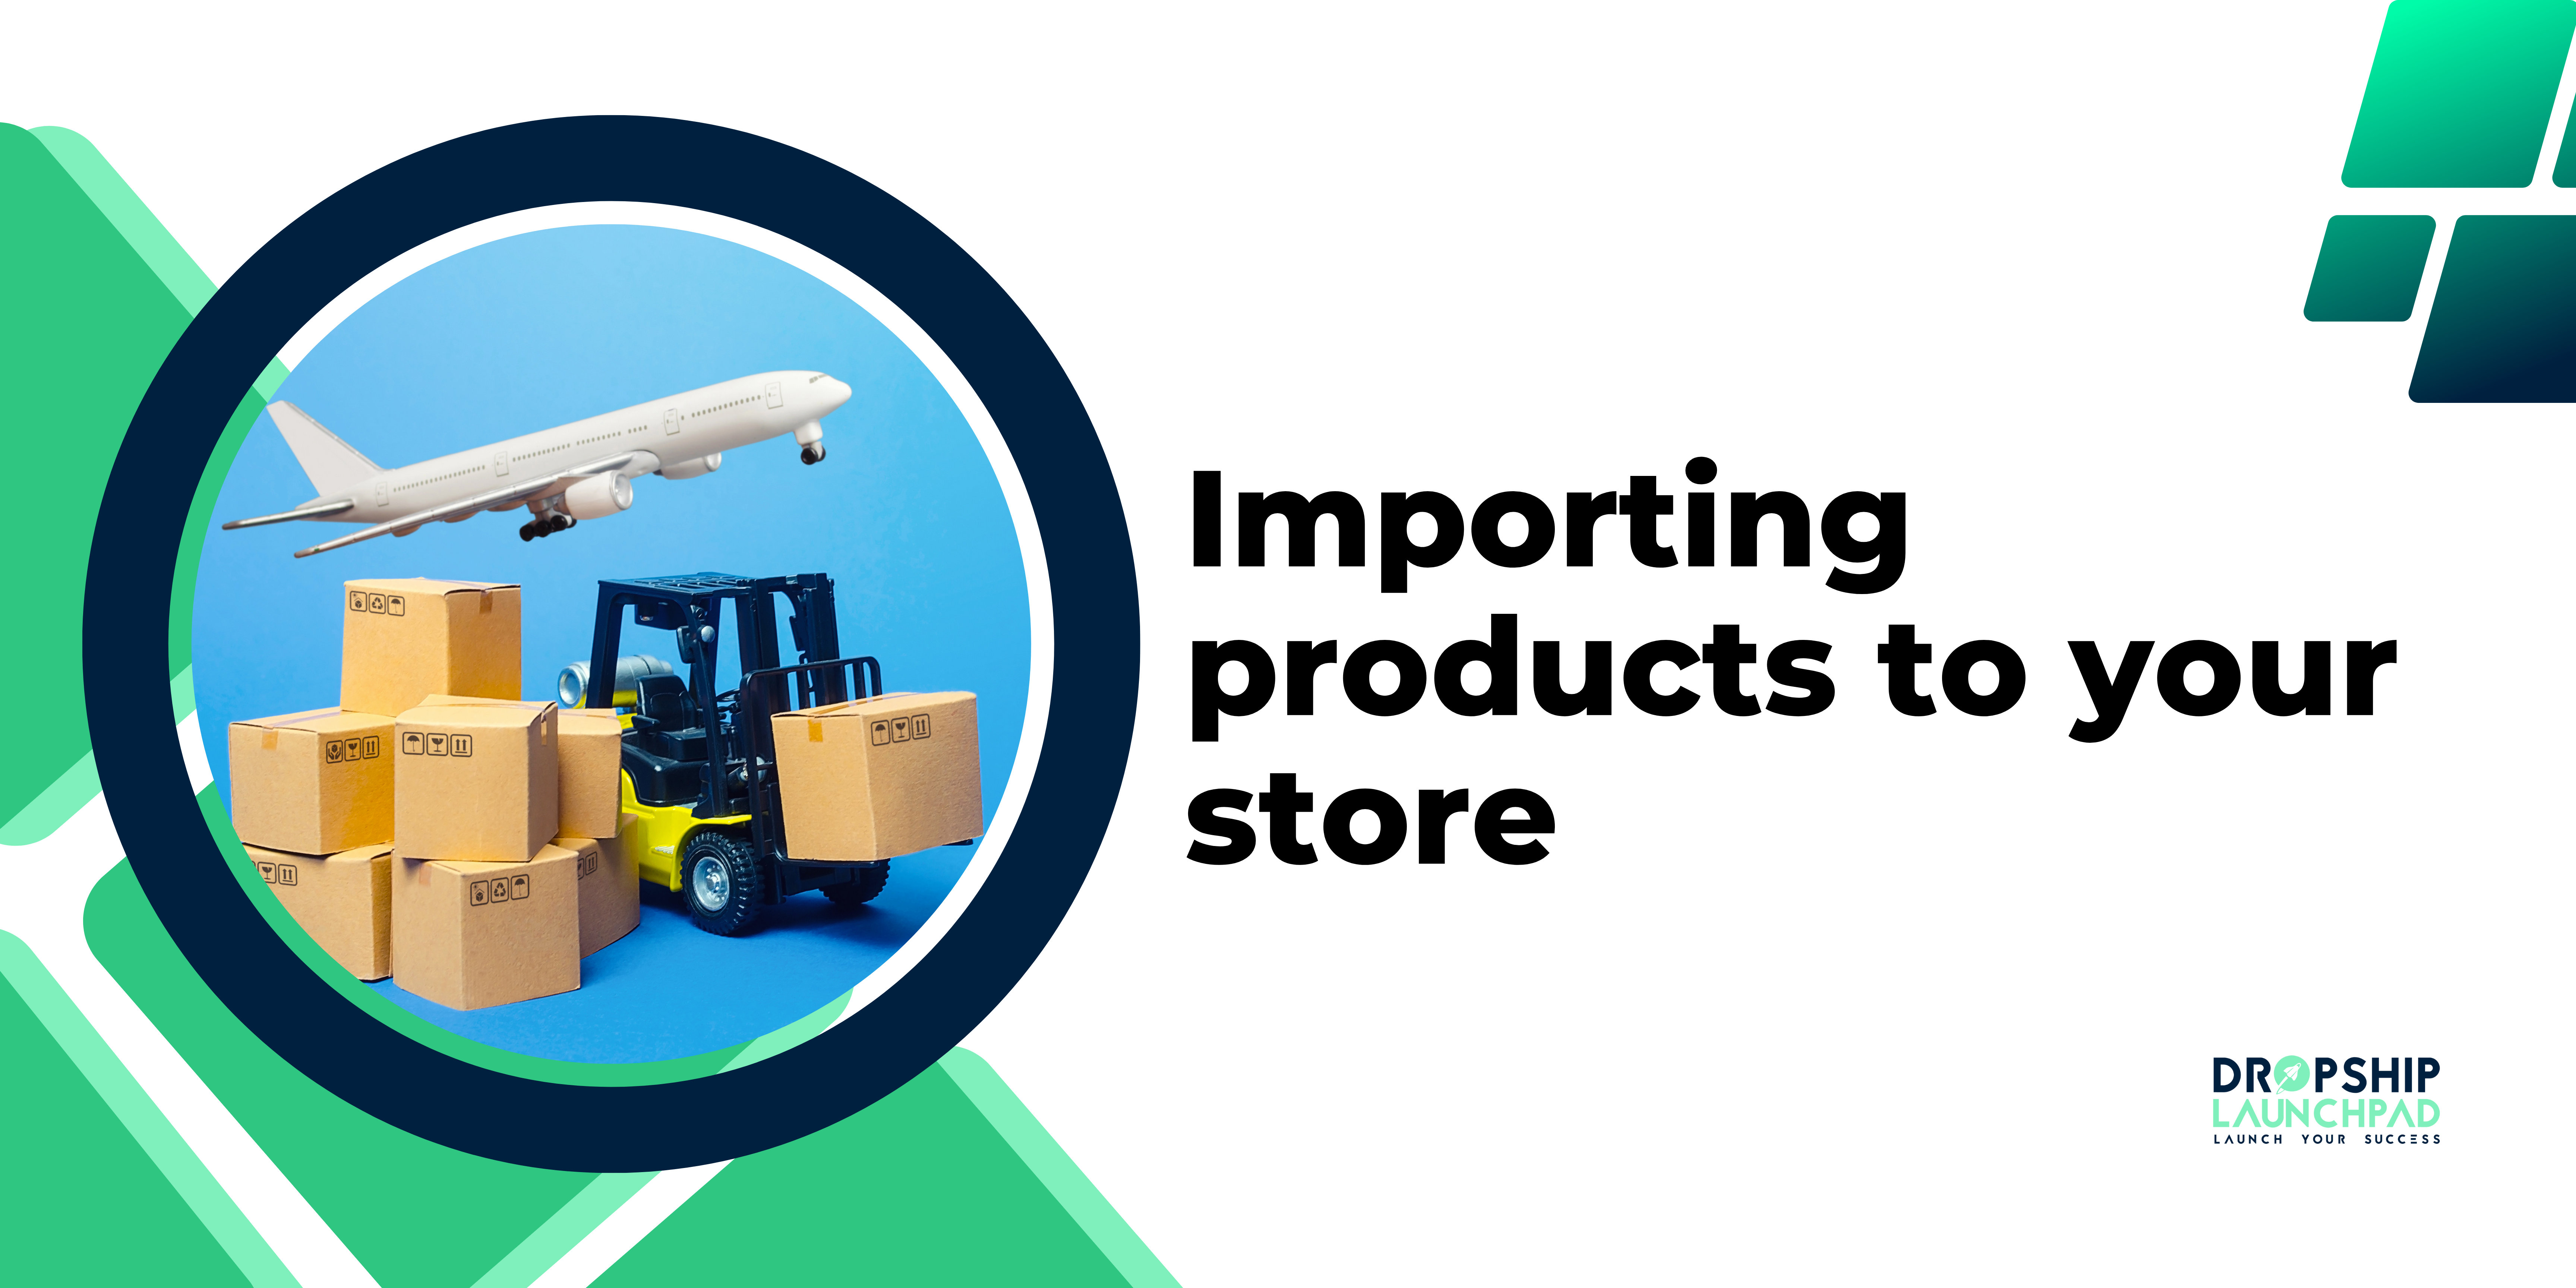 Importing products to your store